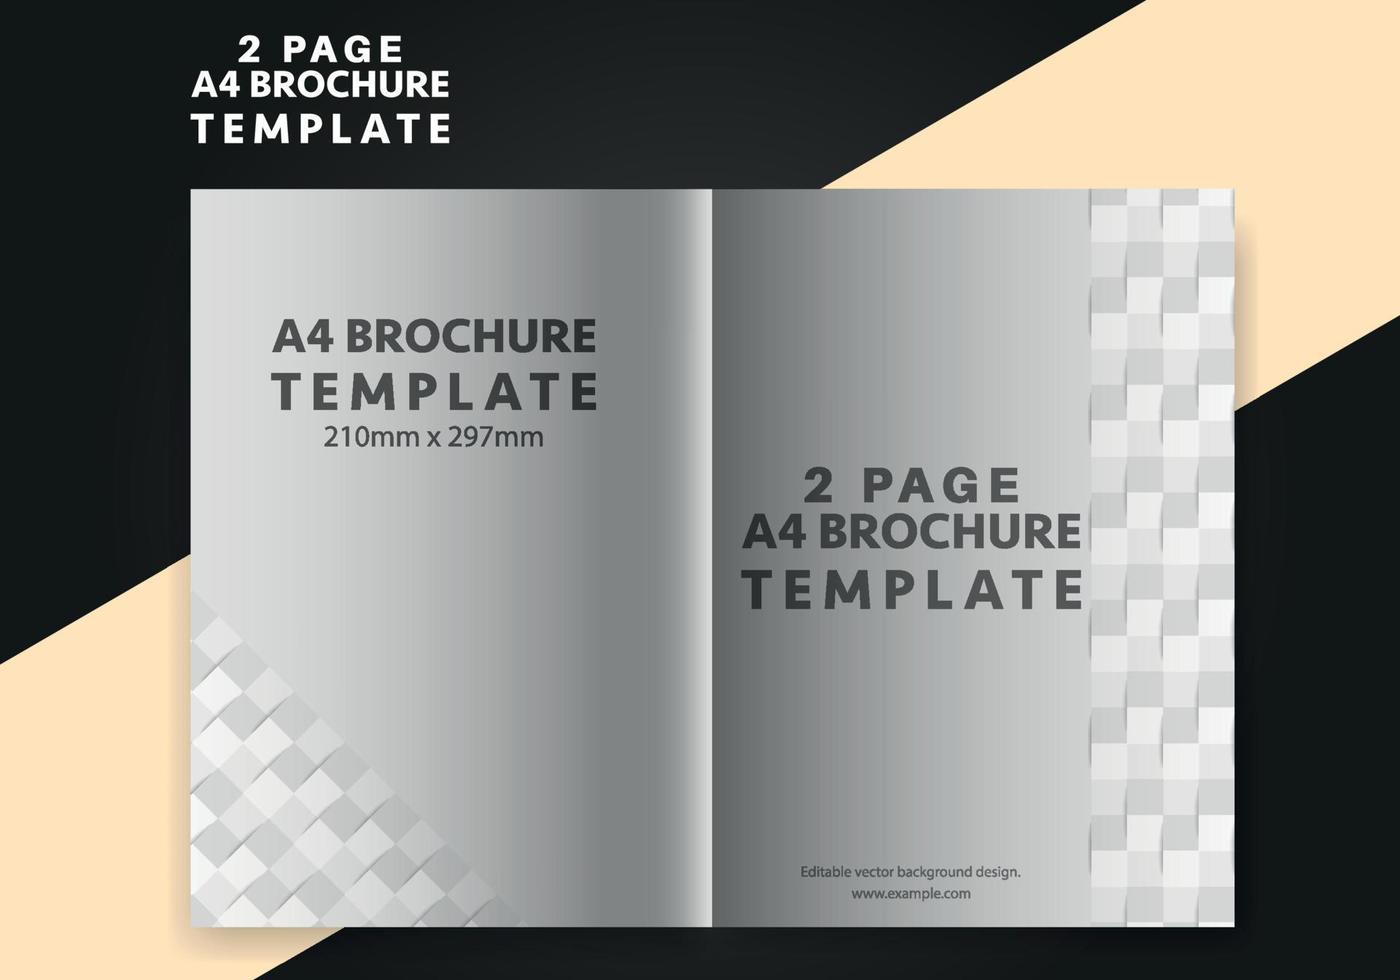 Twofold brochure design. A4 abstract business brochure template. Creative design marketing flyer template with text space. vector